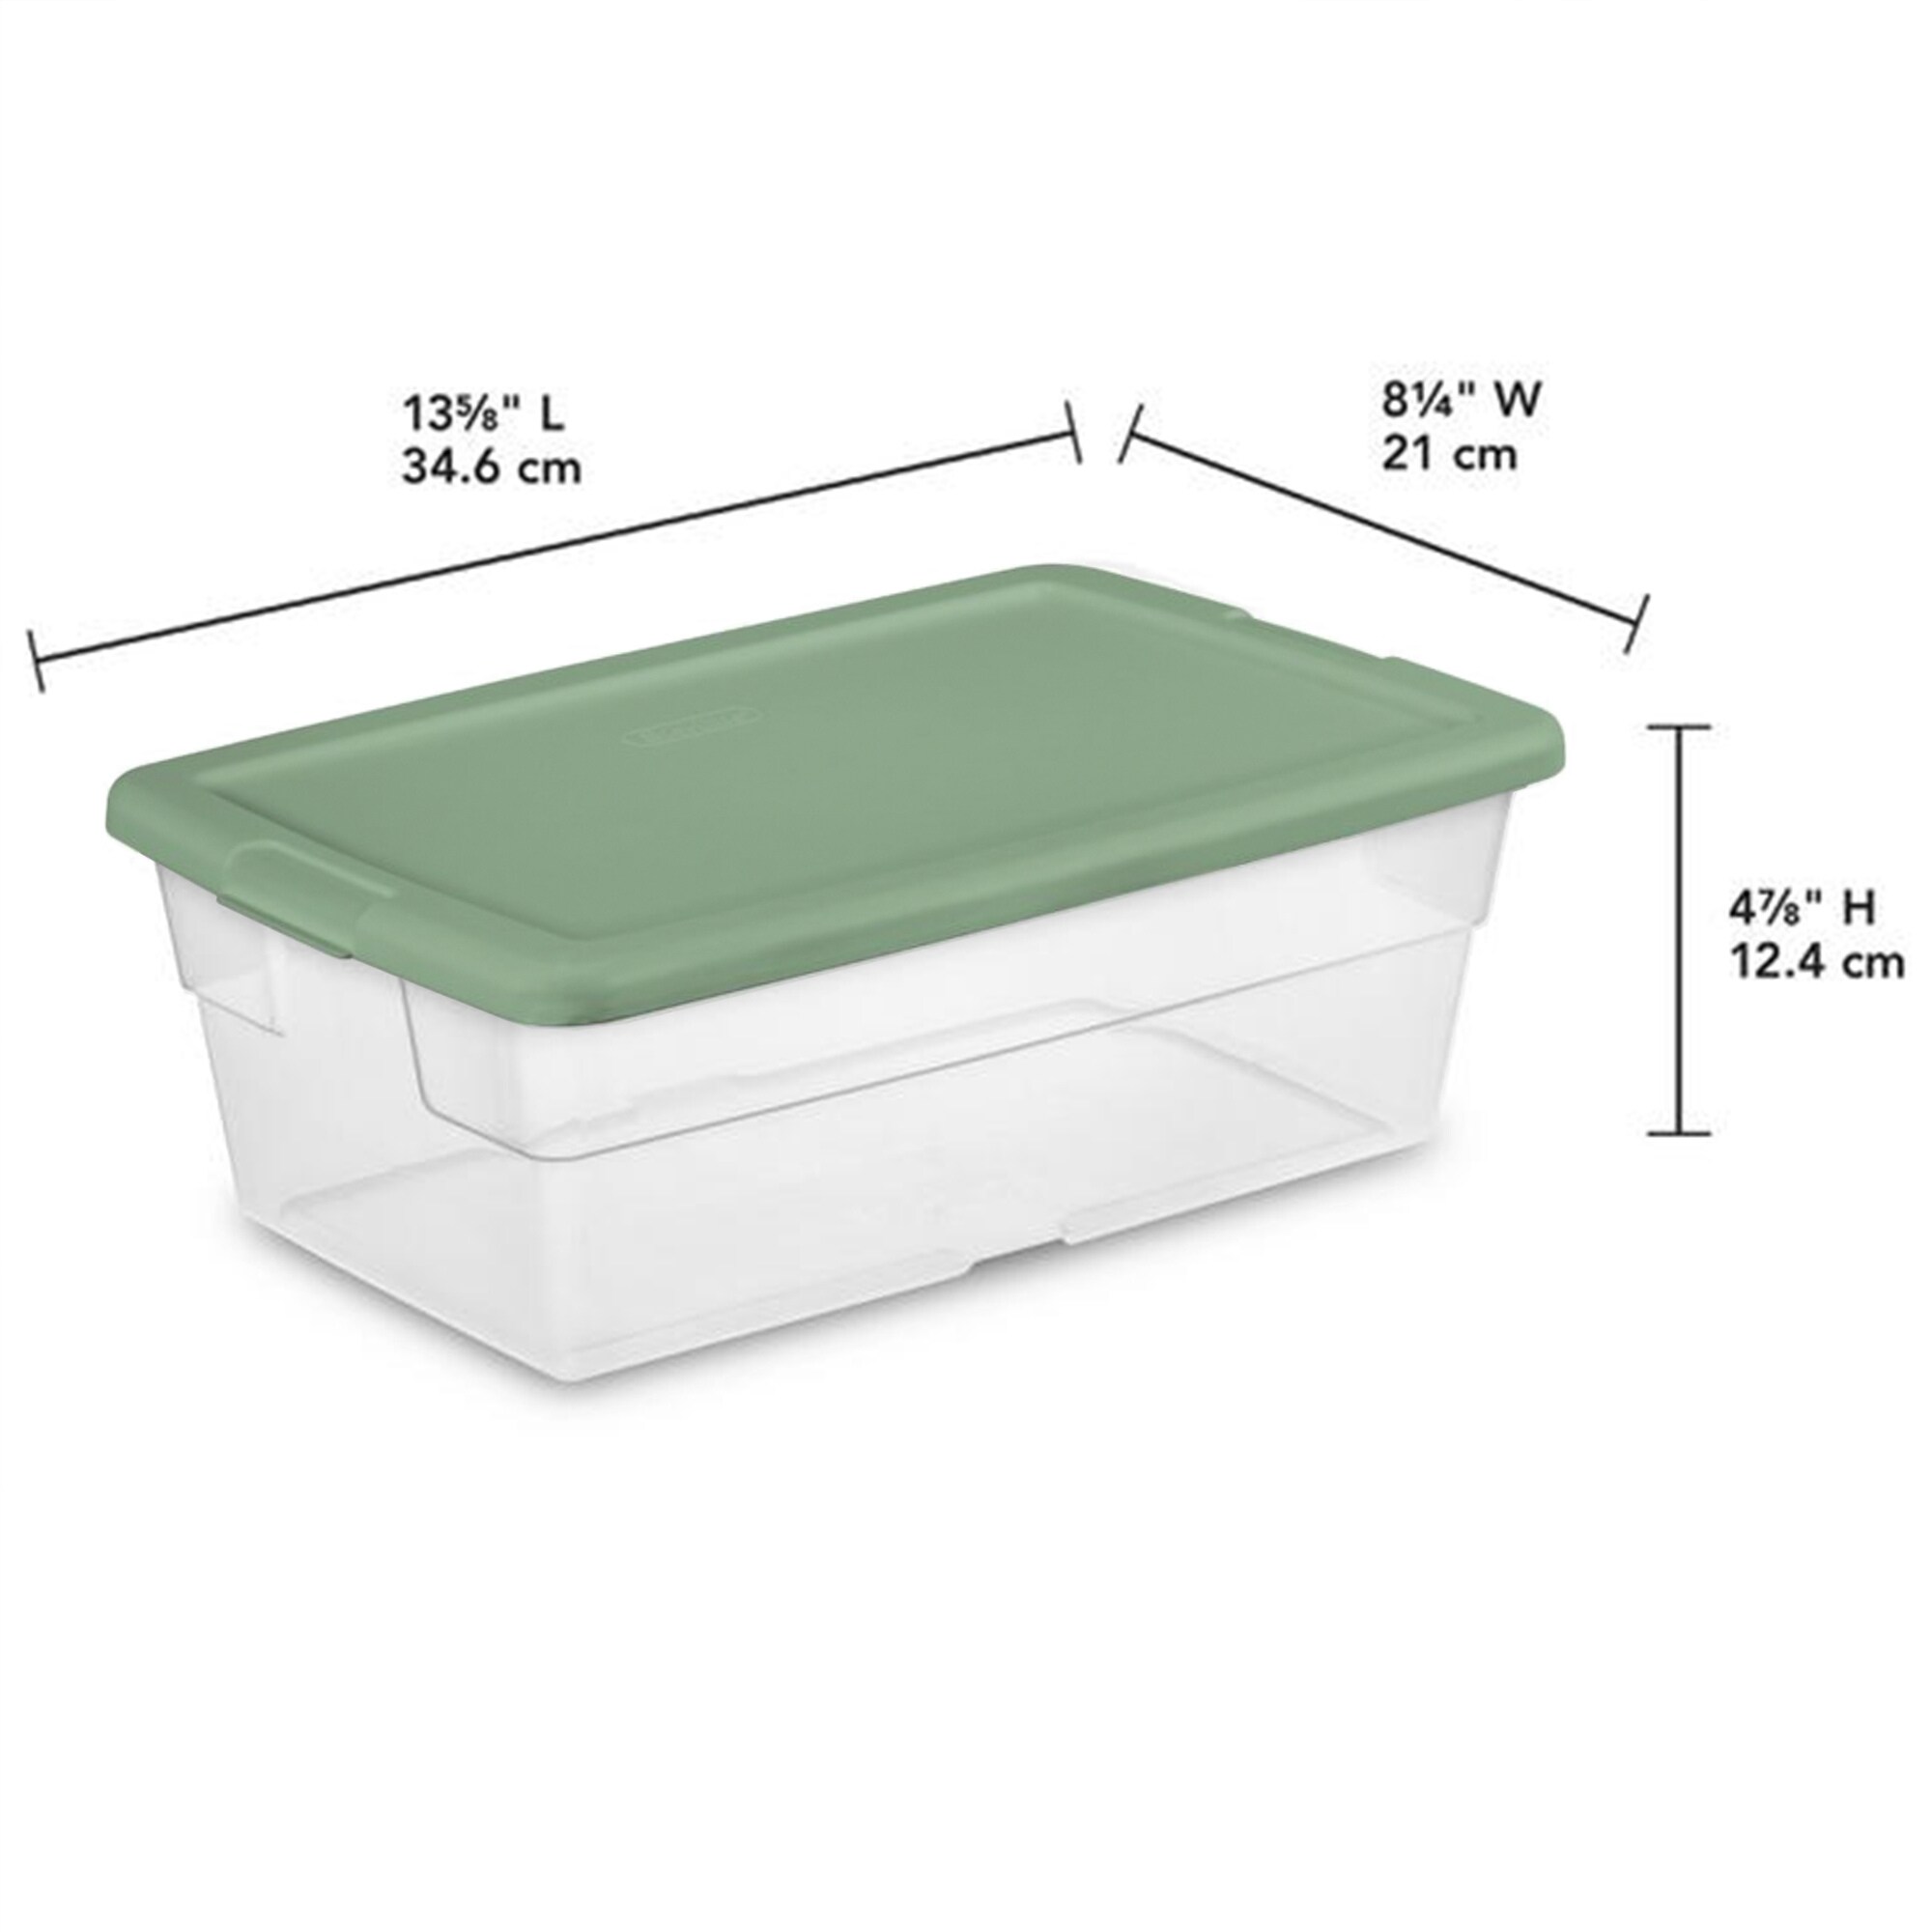 5 Five Simply Smart Plastic Container With Bamboo Lid 1.5 L